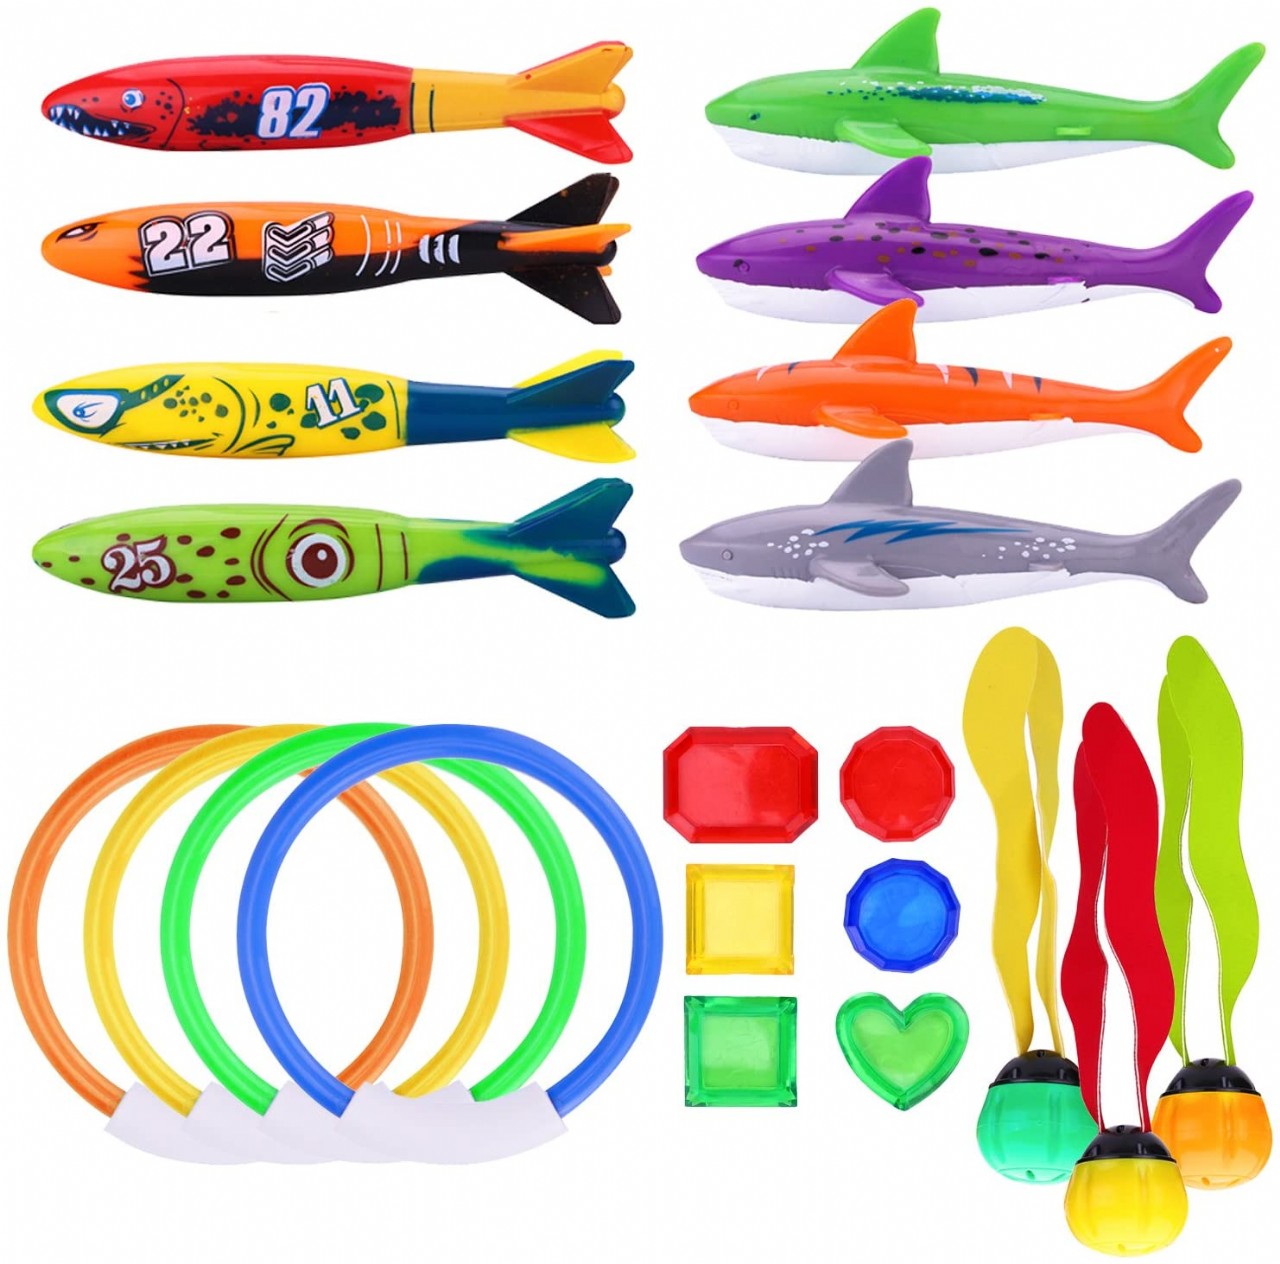 R.HORSE 21 PCS Underwater Swimming/Diving Pool Toy Set, Diving Rings, Toypedo Bandits, Diving Toy